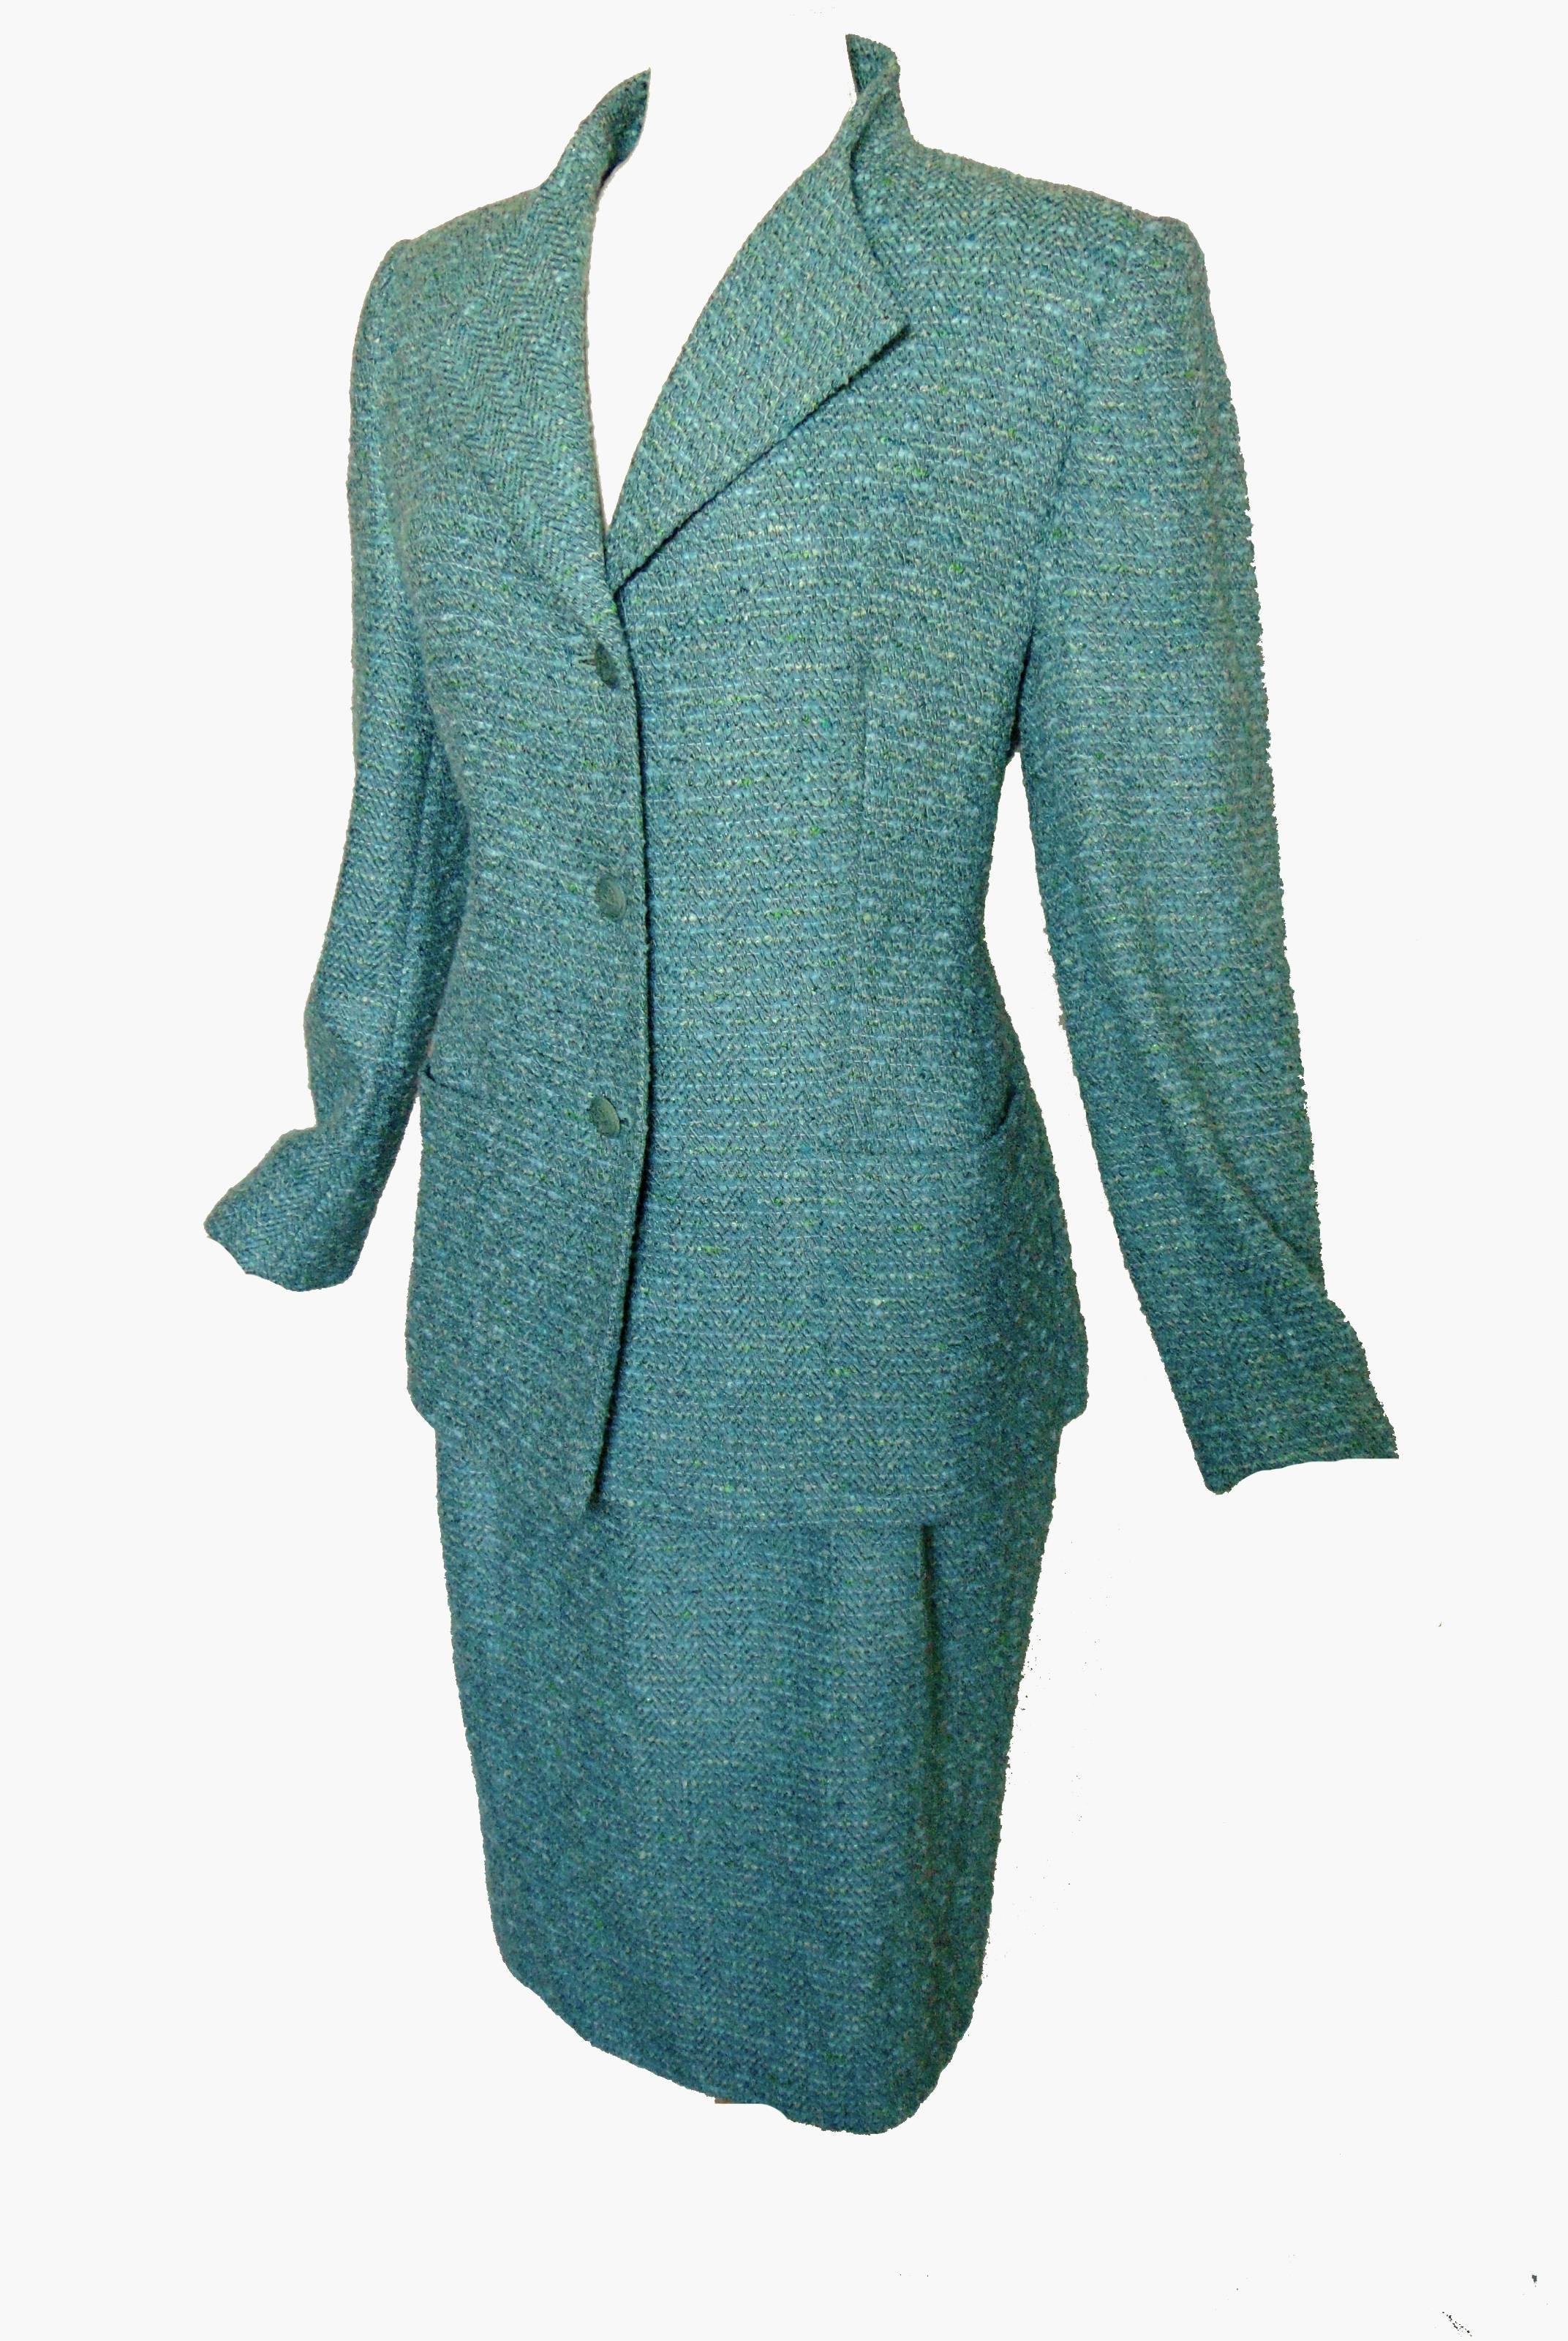 Here's a pretty jacket and skirt suit from Louis Feraud.  Made from a silk, wool and poly blend woven fabric in aqua, the weave features flecks of white and green, for a gorgeous texture and color!  Fully-lined and in excellent condition.  Tagged